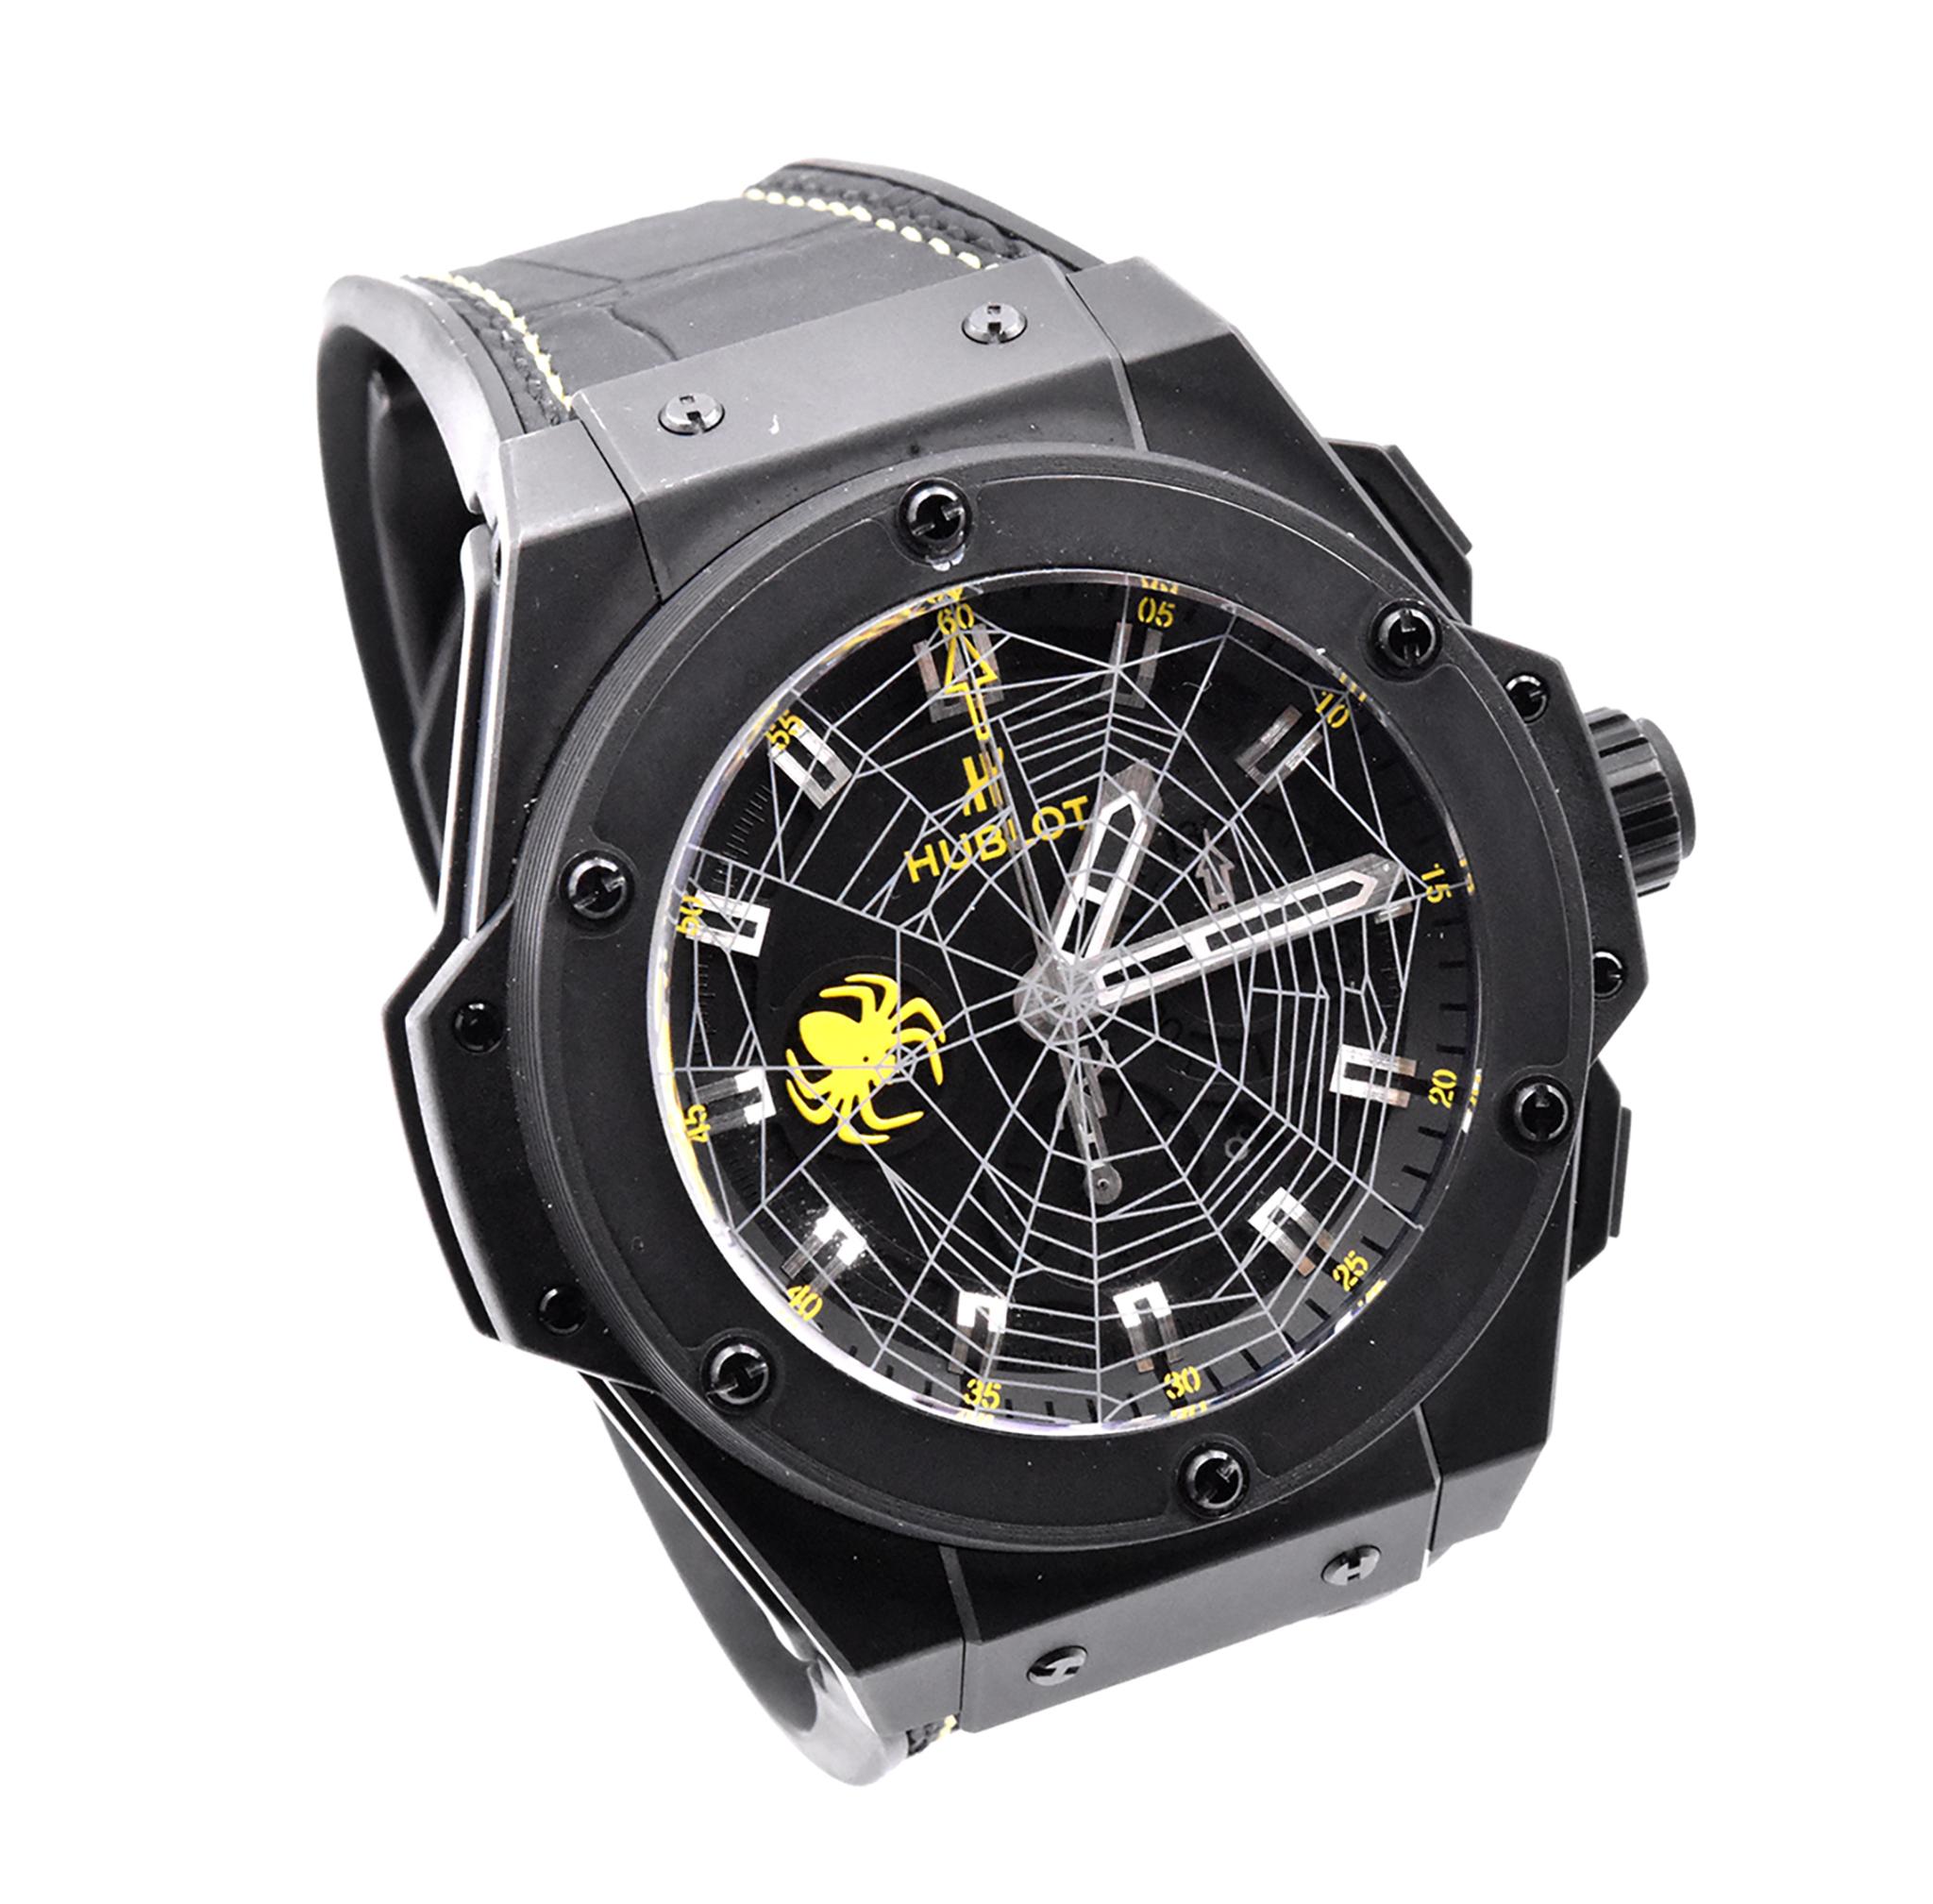 Movement: automatic 
Function: hours, minutes, sub seconds, date, chronograph
Case: 48mm black ceramic case, sapphire spider web crystal, exhibition case back, 
Band: black rubber Hublot strap with locking deployment clasp
Dial: black spider, spider